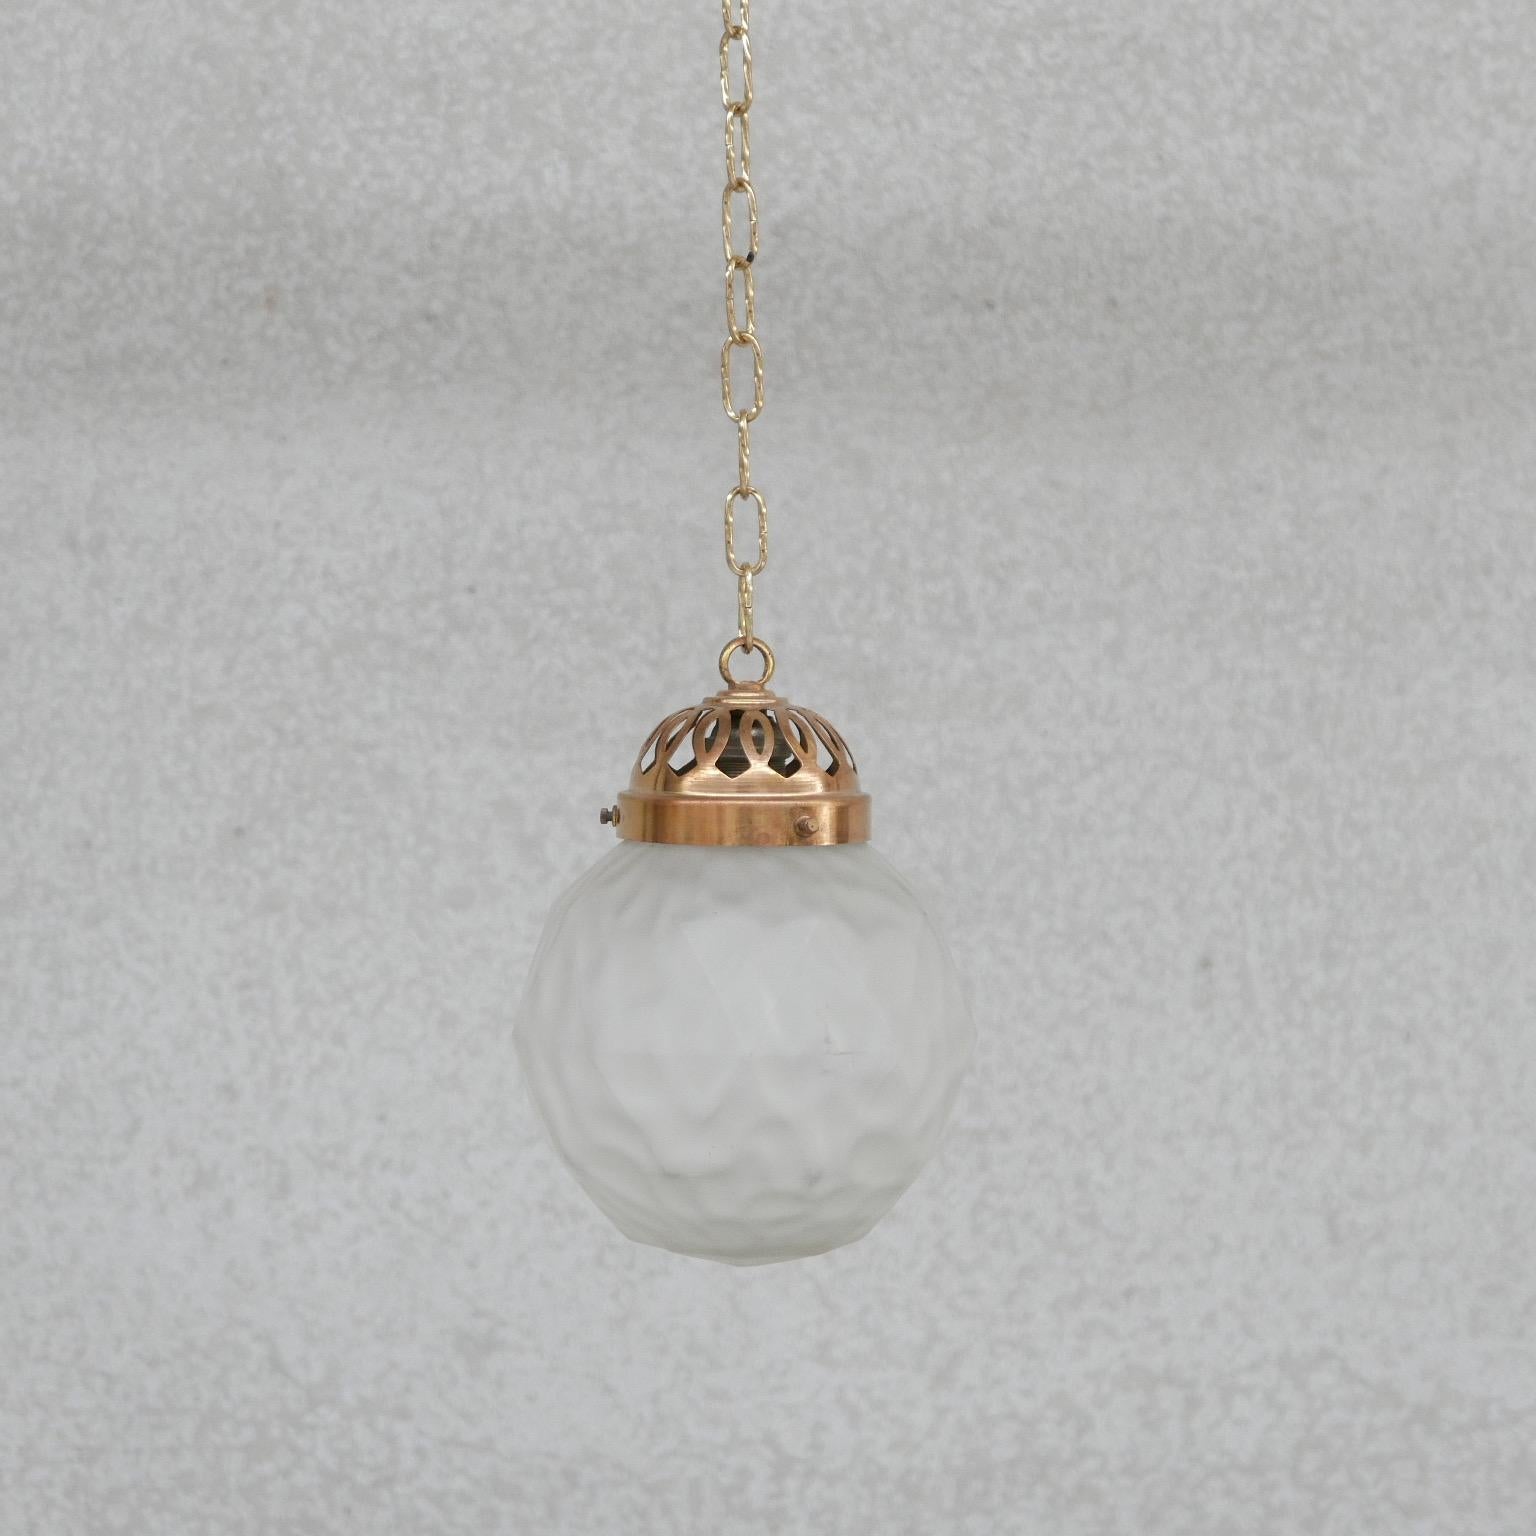 A small dinky French pendant light. 

France, c1930s. 

Decorative brass gallery with etched glass pendant. 

No chain retained, but we can provide upon request. 

Since re-wired and PAT tested. 

Do check dimensions - as it is small.